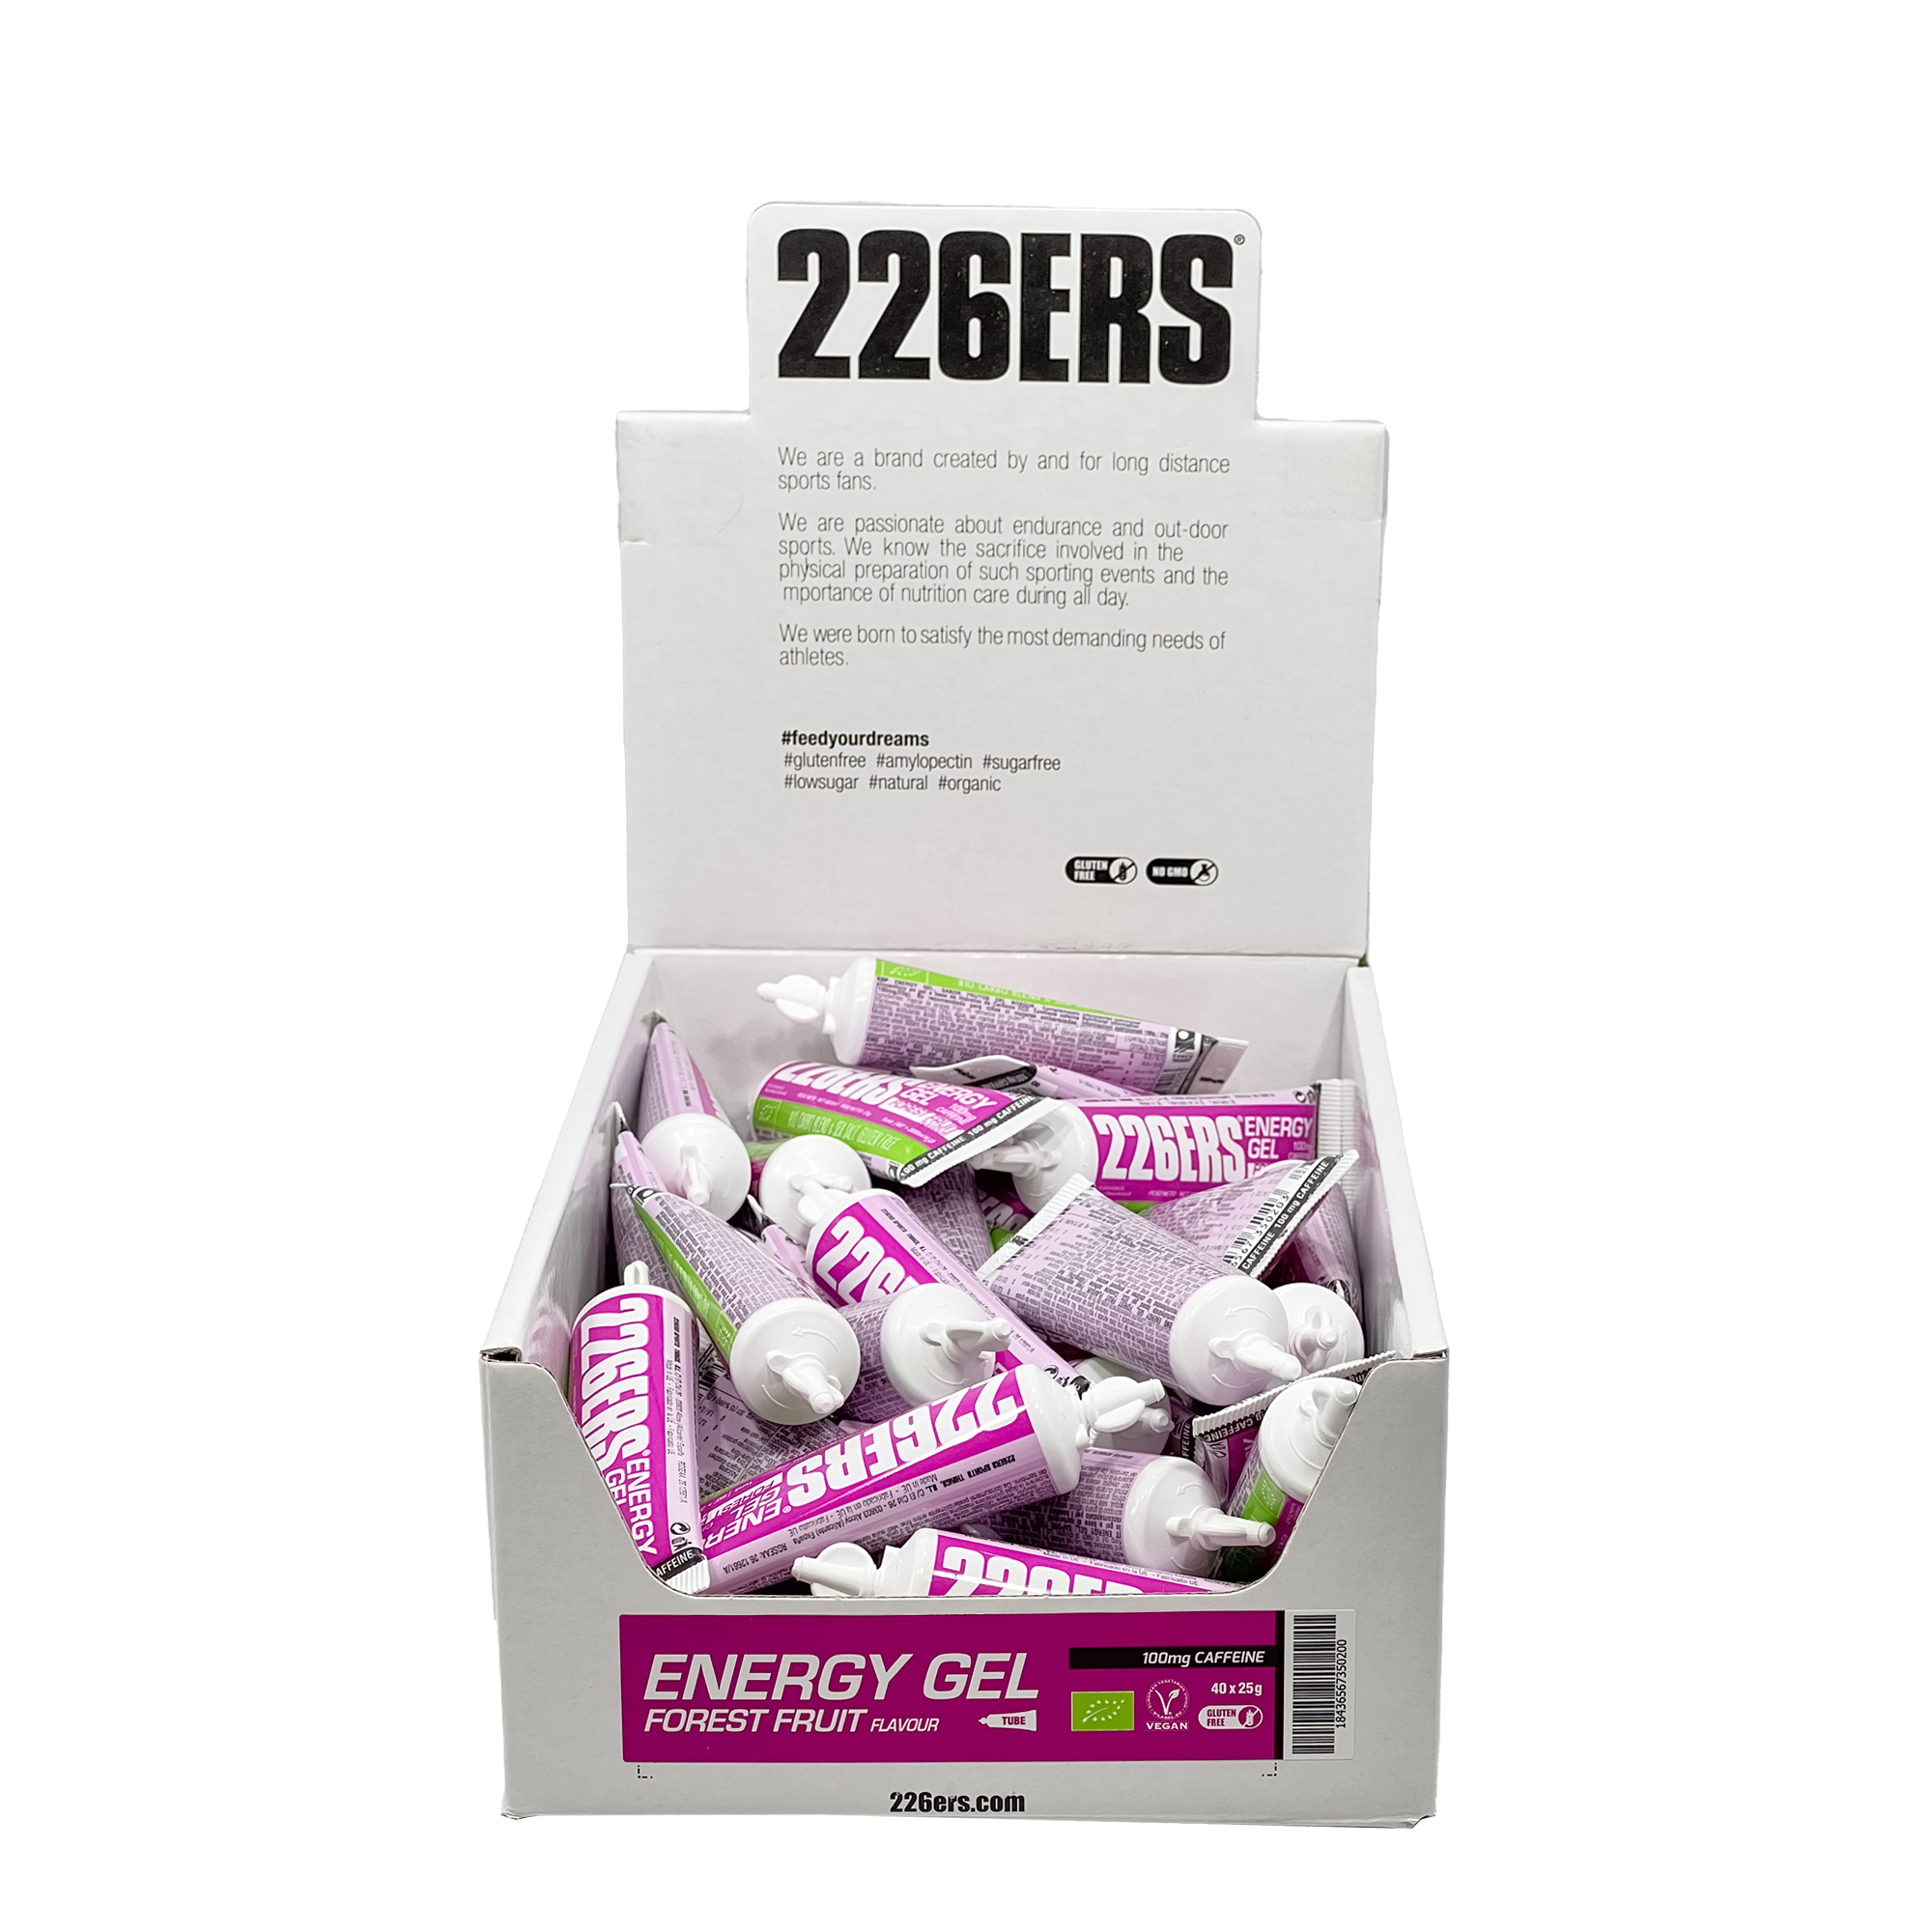 226ERS ENERGY GEL BIO BOX 40 UNITS FRUITS OF THE FOREST